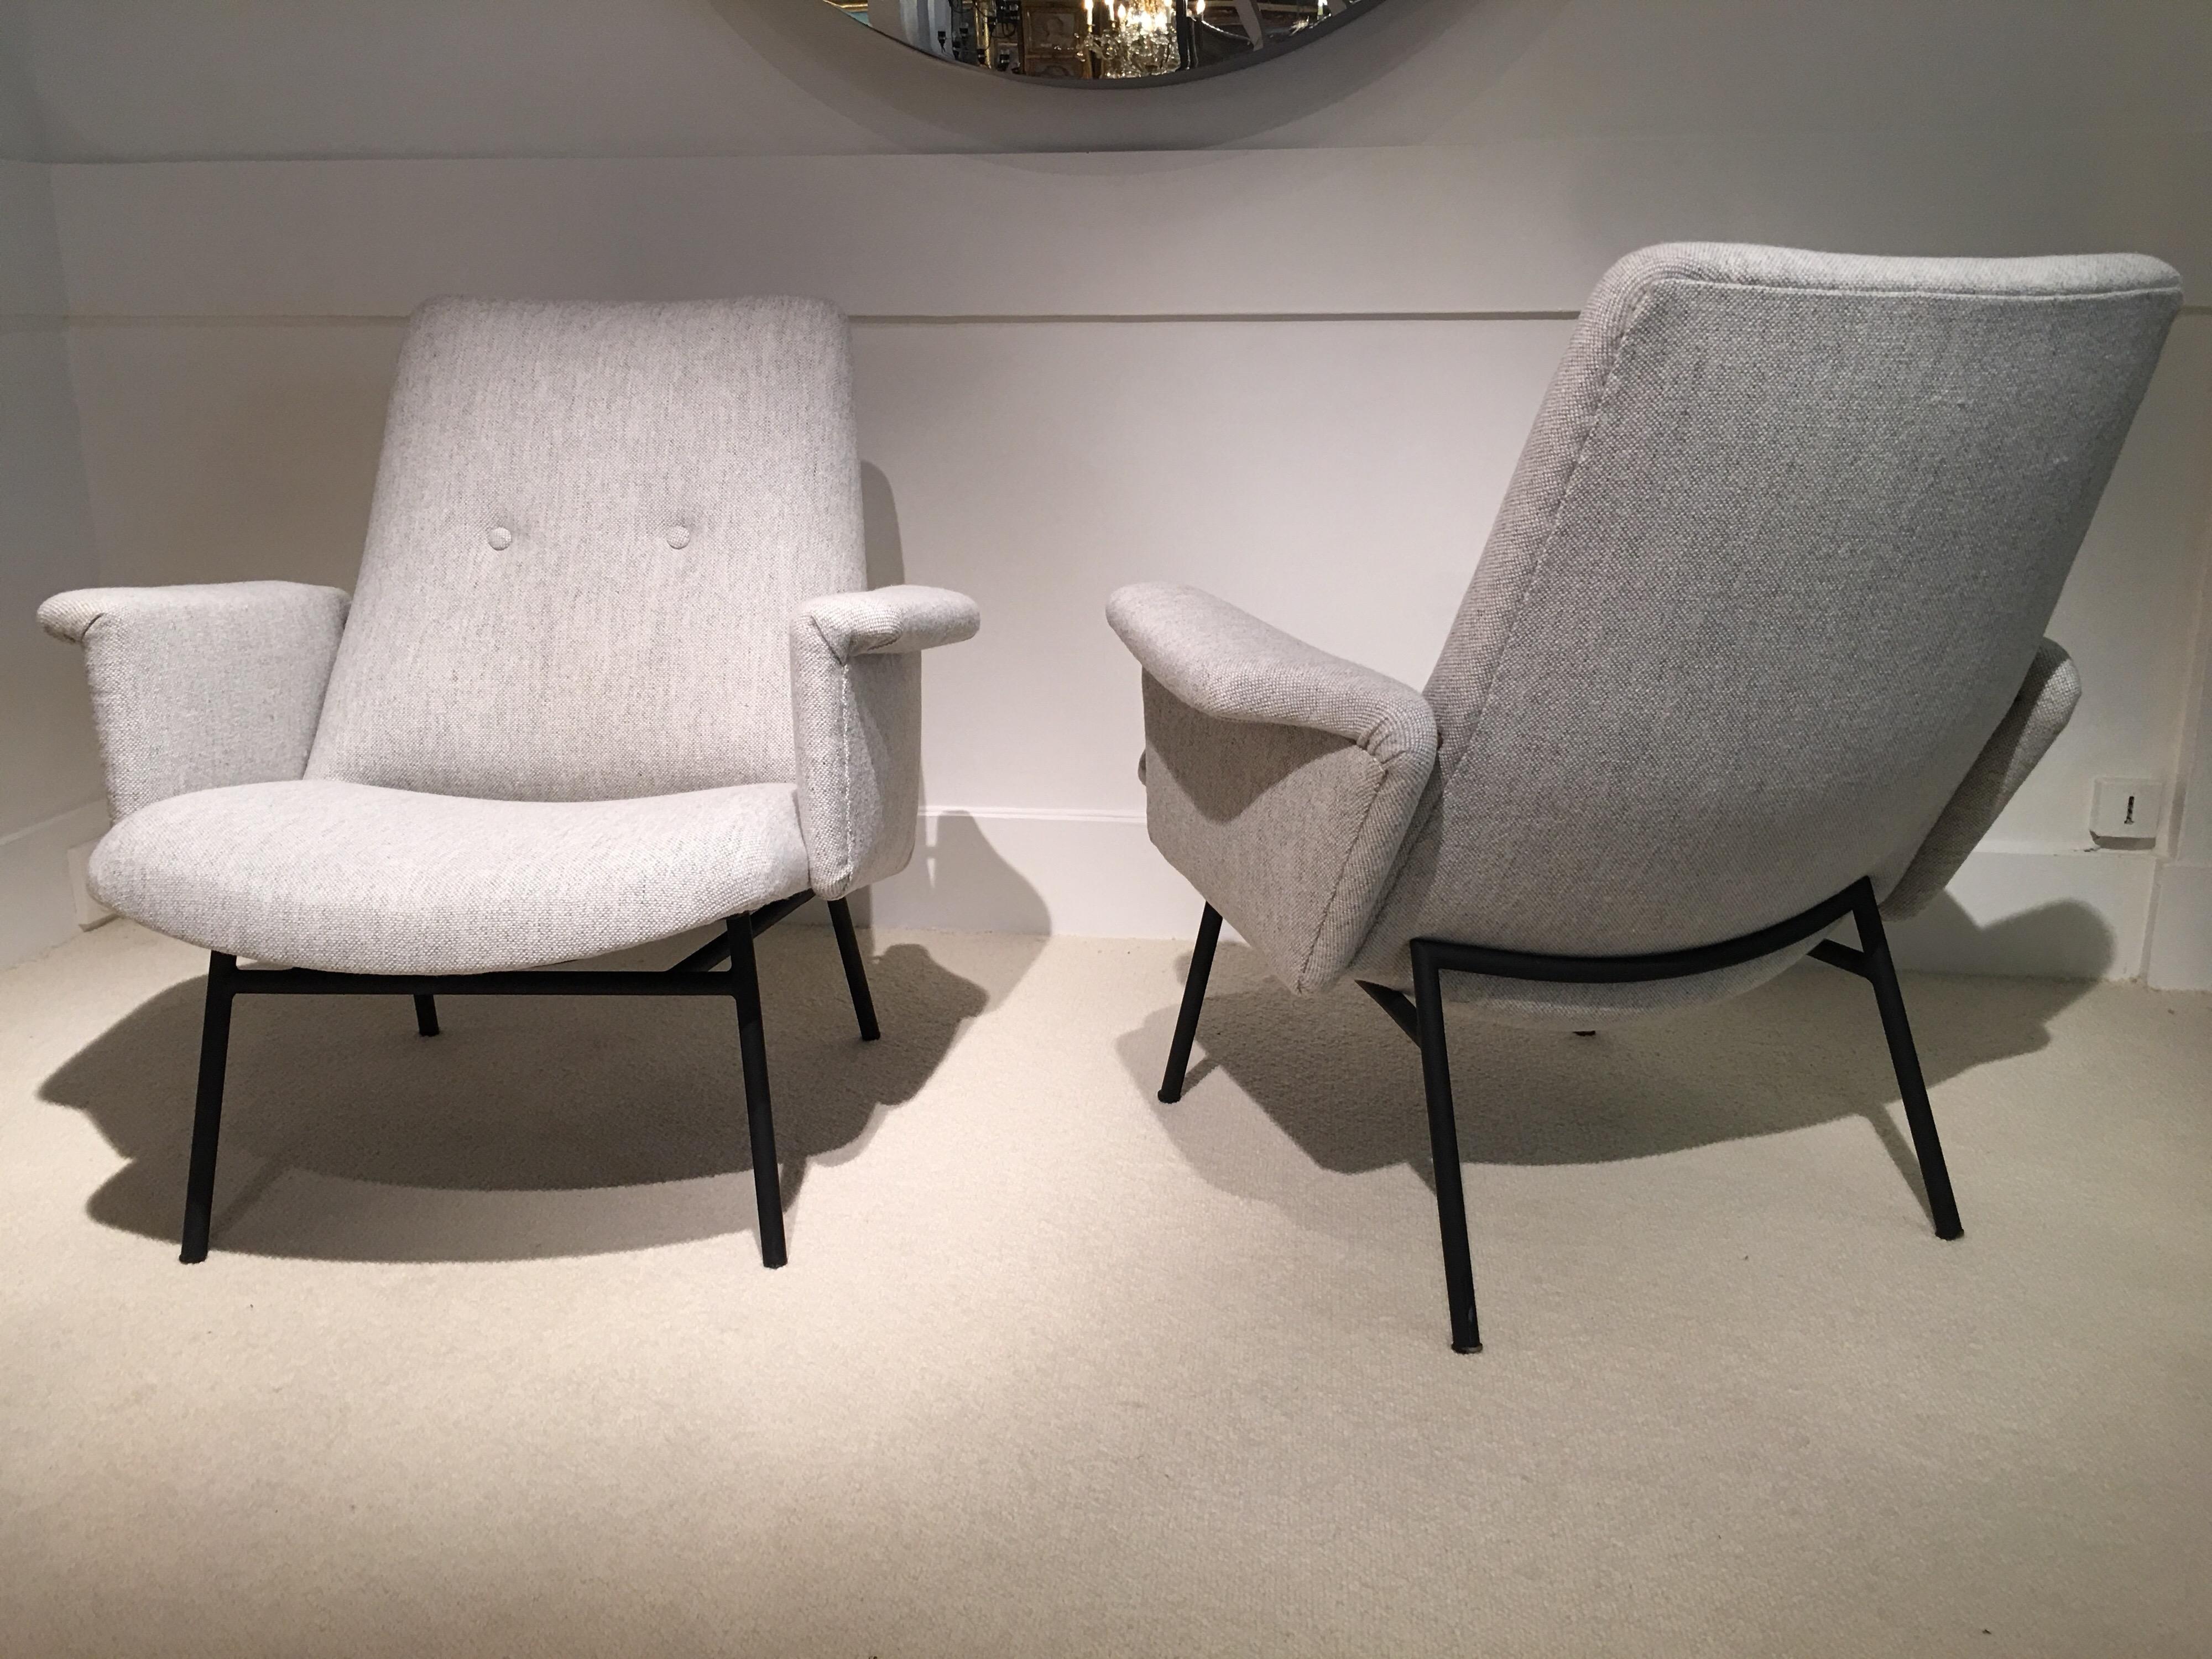 Pair of Sk660 armchairs by Pierre Guariche.
New uphostered with grey and white Kvadrat hallindall wool
Great condition.